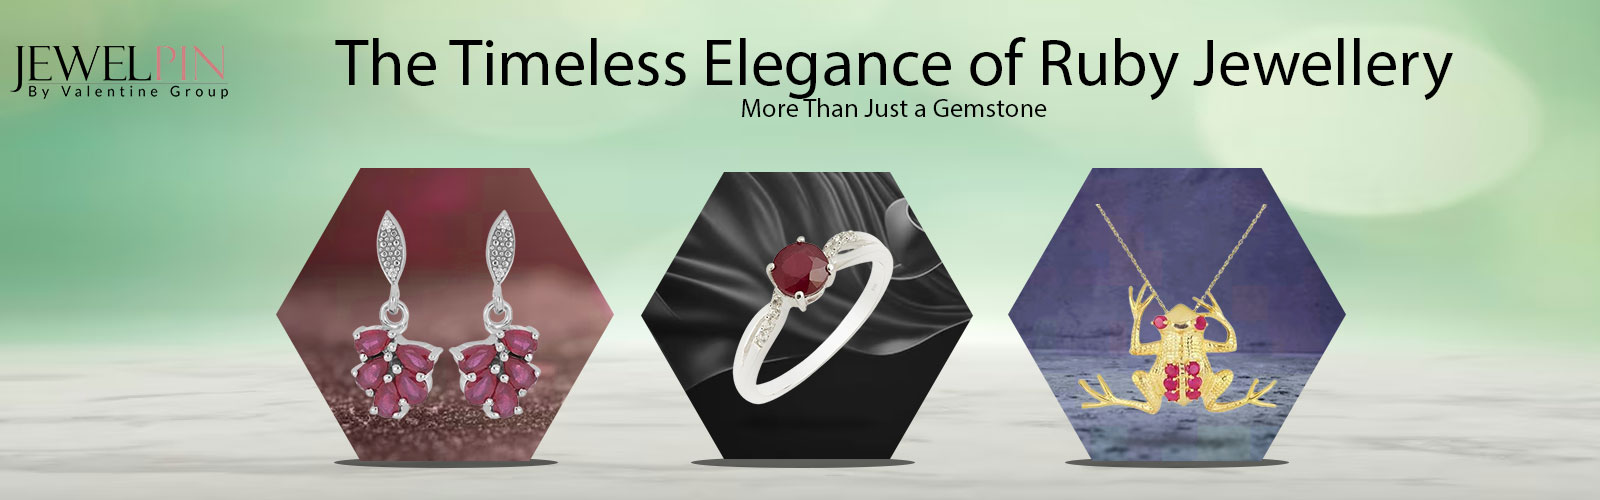 The Timeless Elegance of Ruby Jewellery More Than Just a Gemstone - JewelPin 